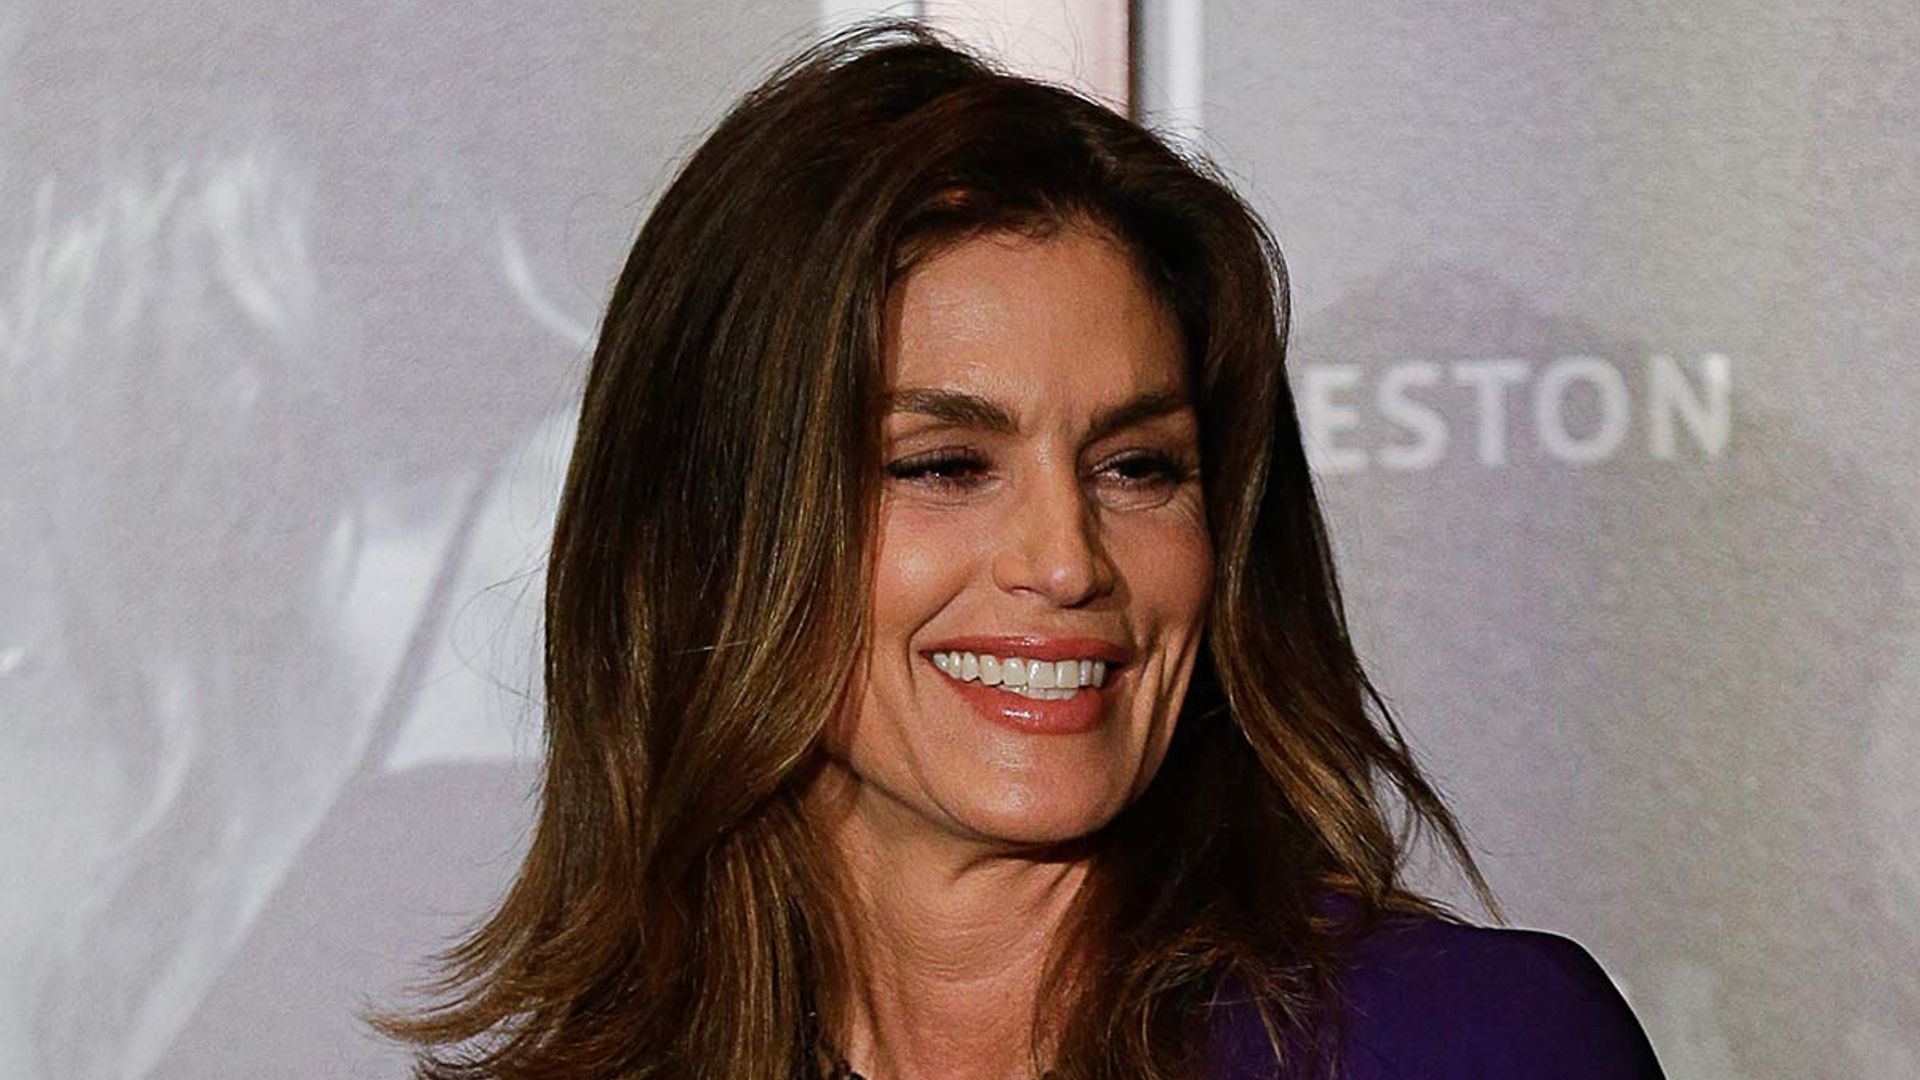 Cindy Crawford, 55, wows in lace bodysuit and killer heels as fans react